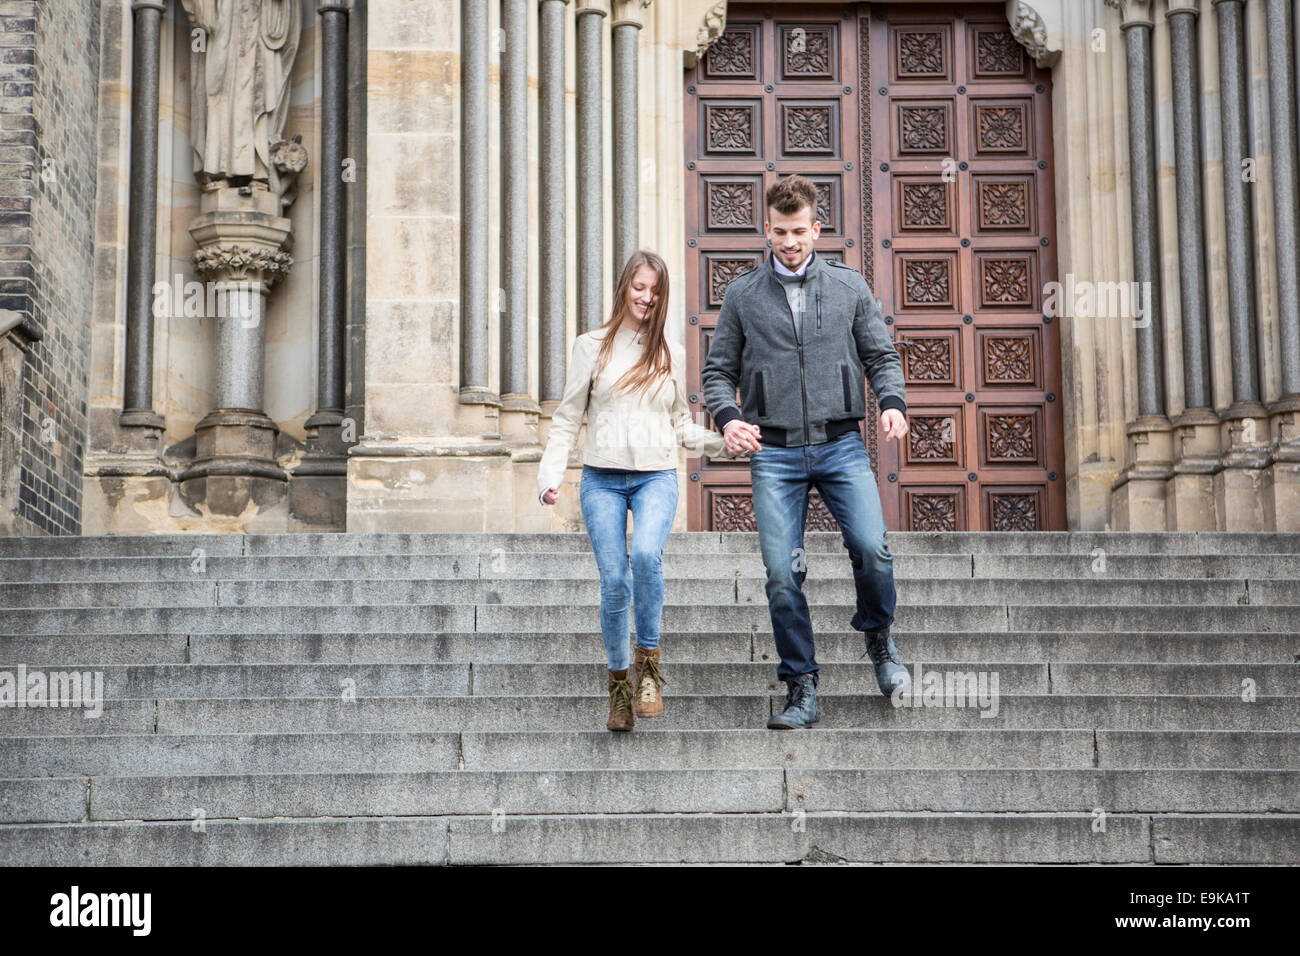 Full length of young couple moving down steps against building Stock Photo